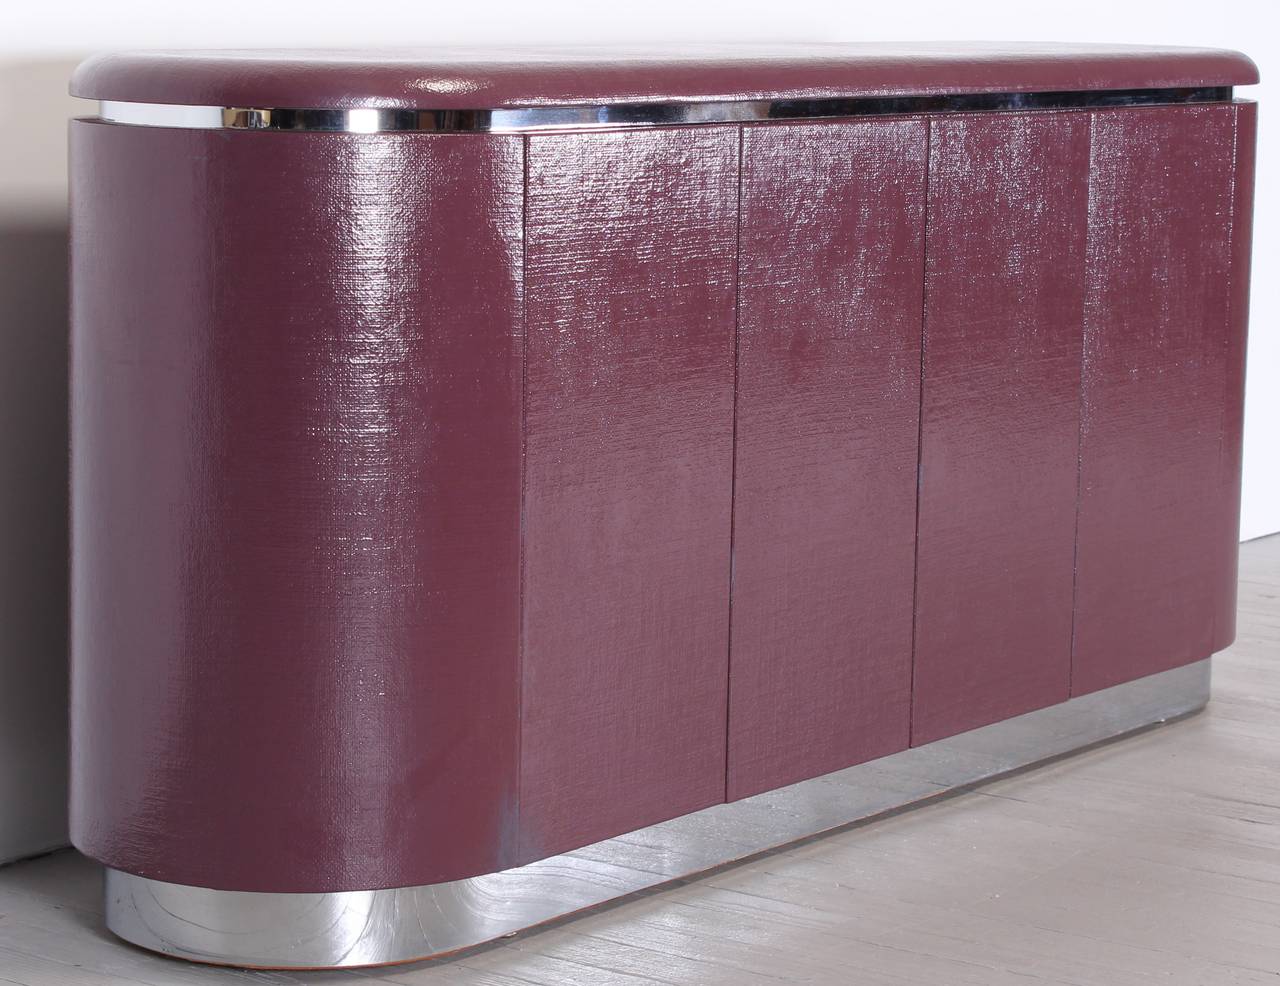 1980s Karl Springer style credenza in purple linen covered case with chrome accents.